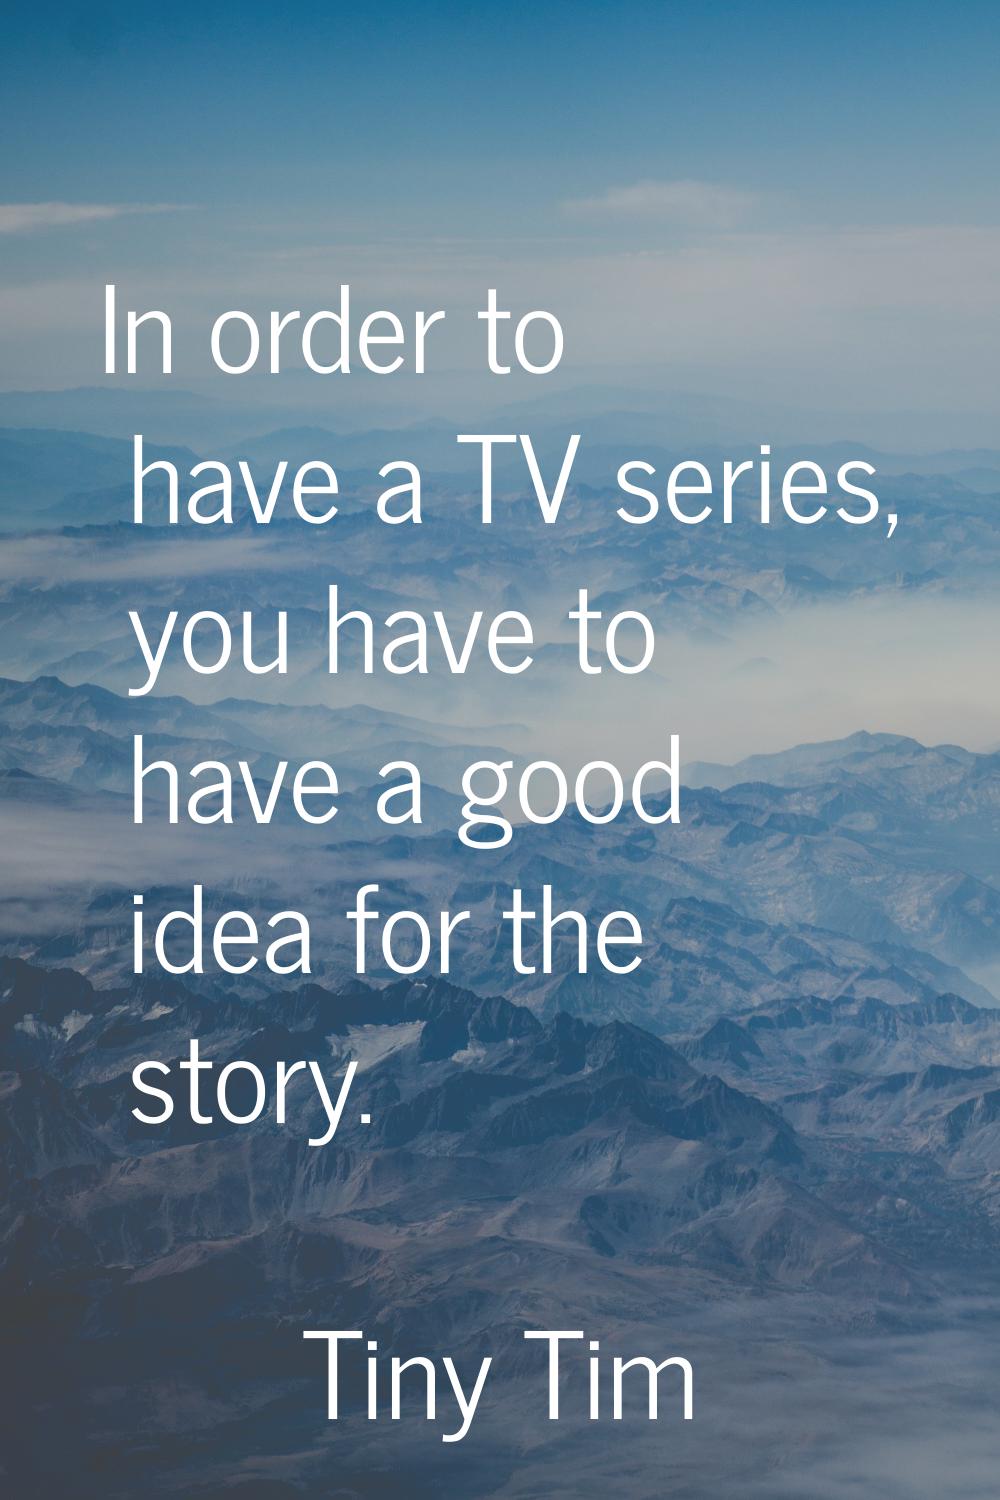 In order to have a TV series, you have to have a good idea for the story.